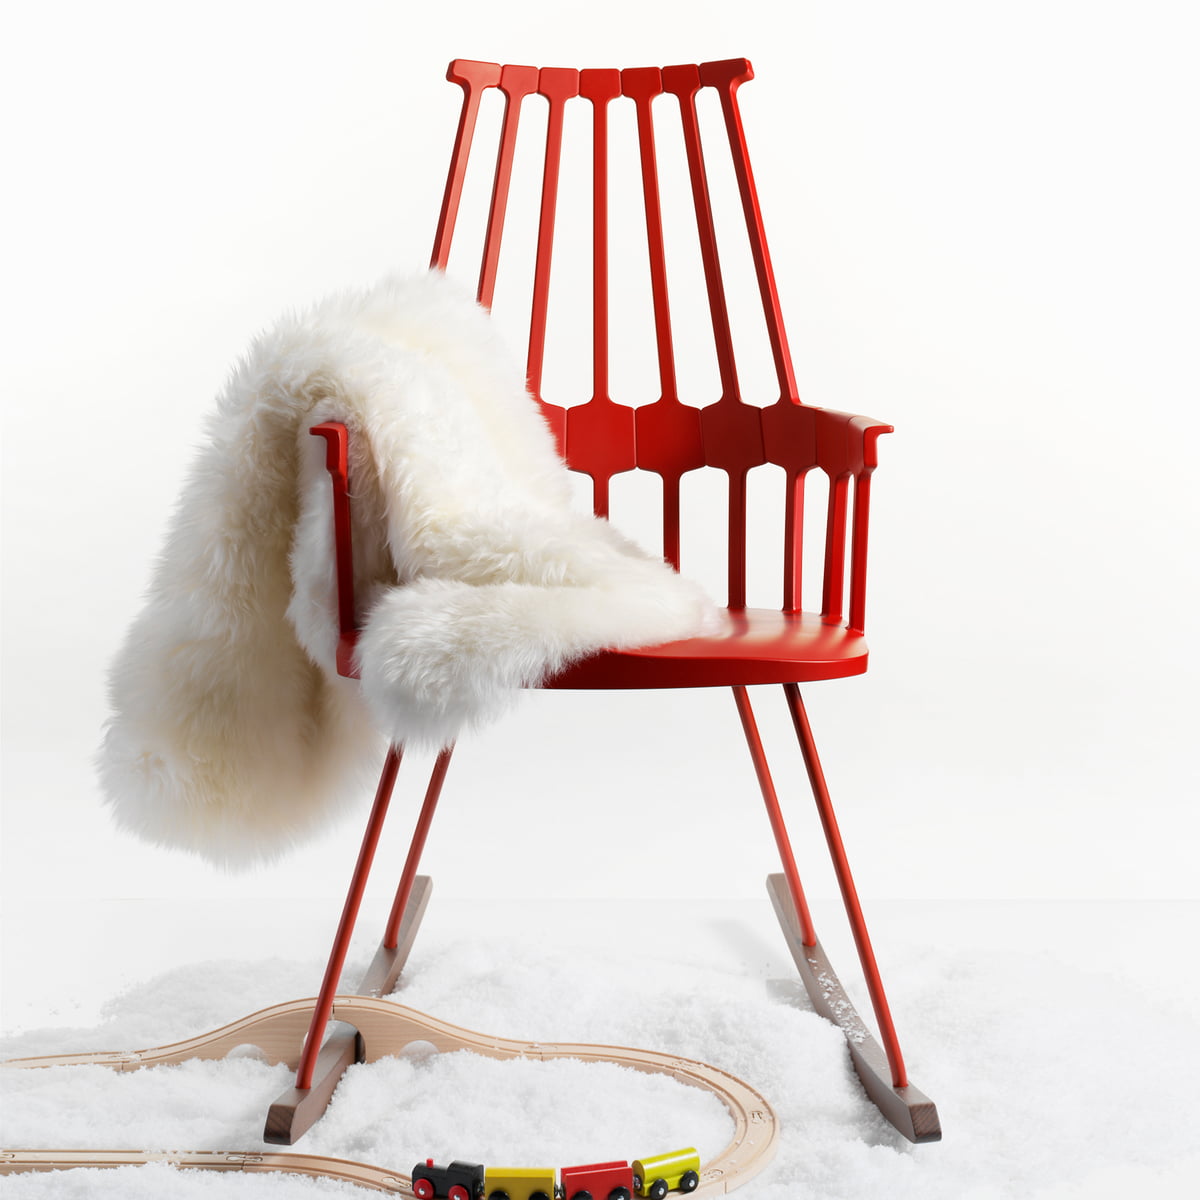 Comback Chair by Patricia Urquiola for Kartell